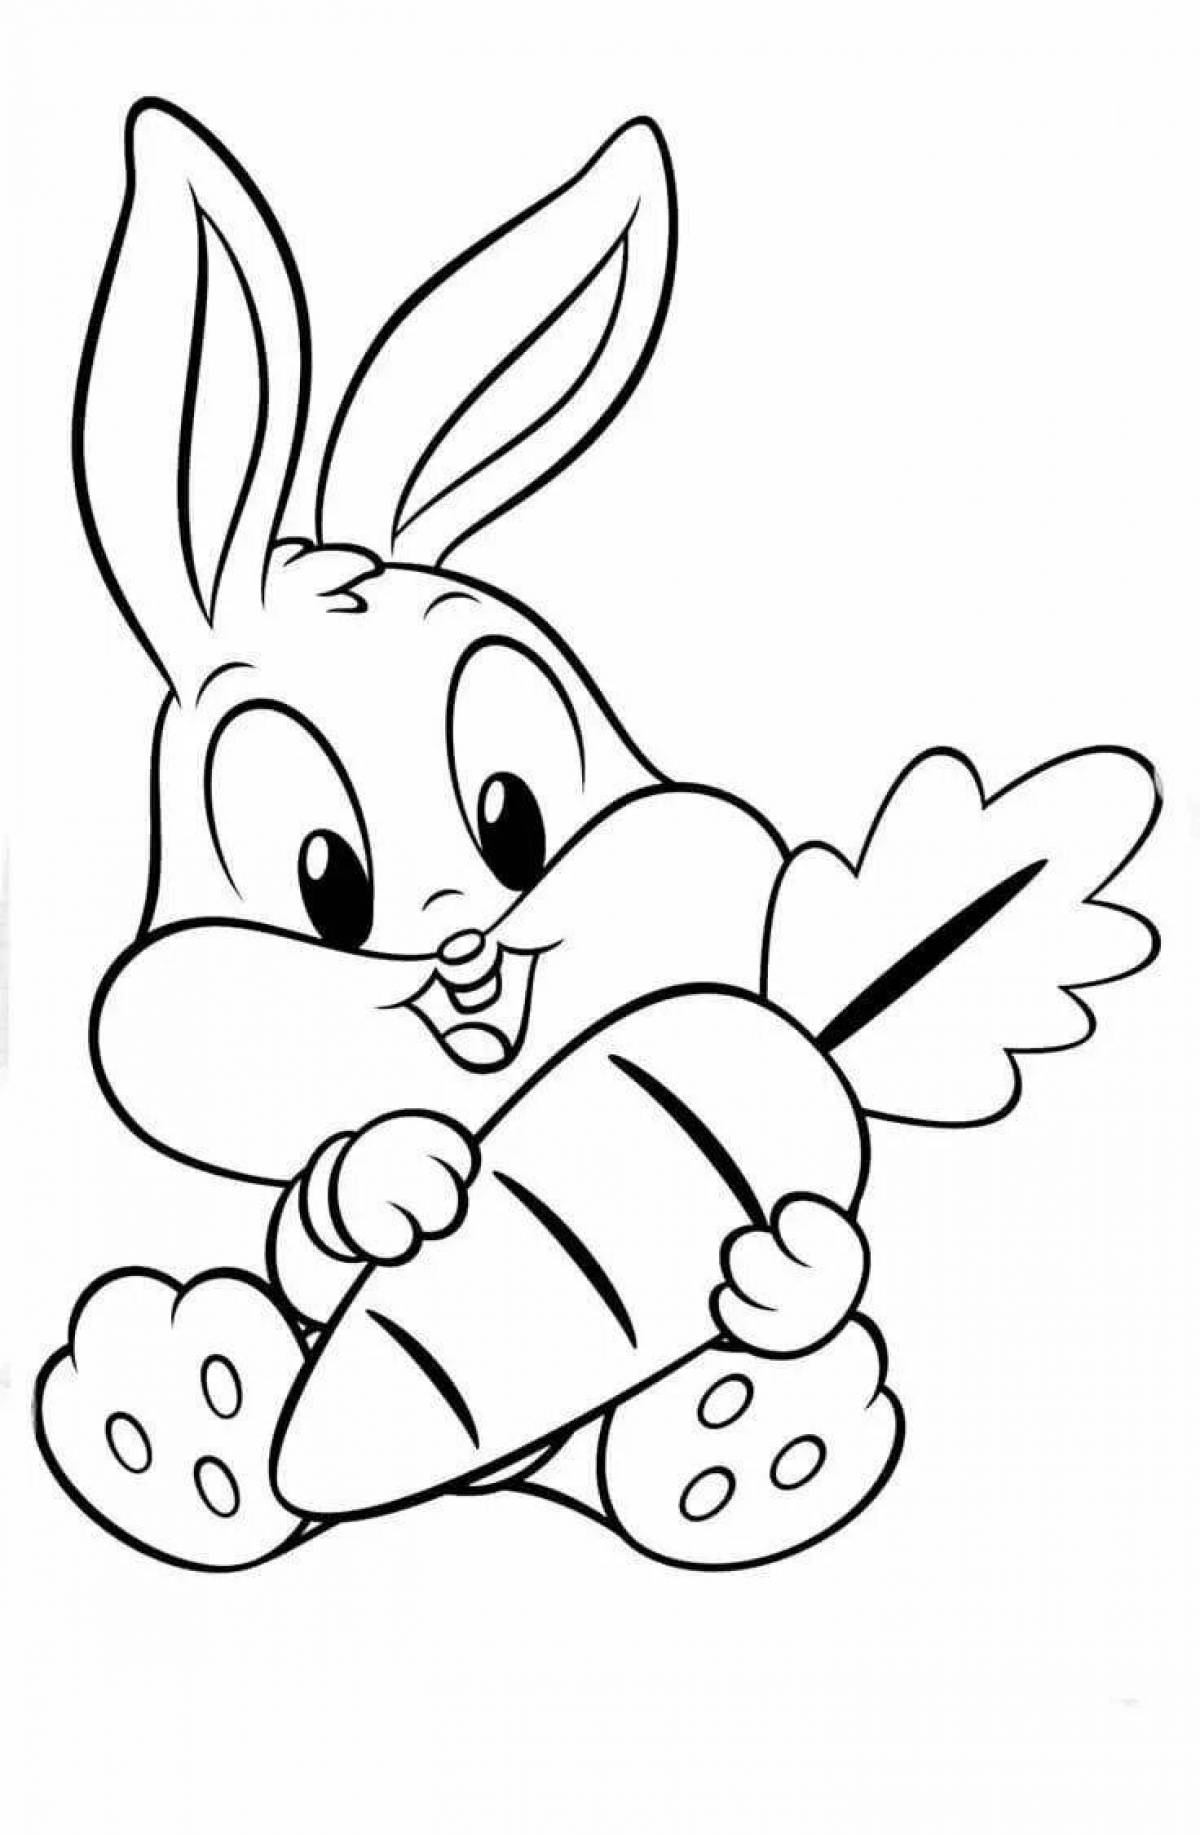 Fun coloring hare for kids